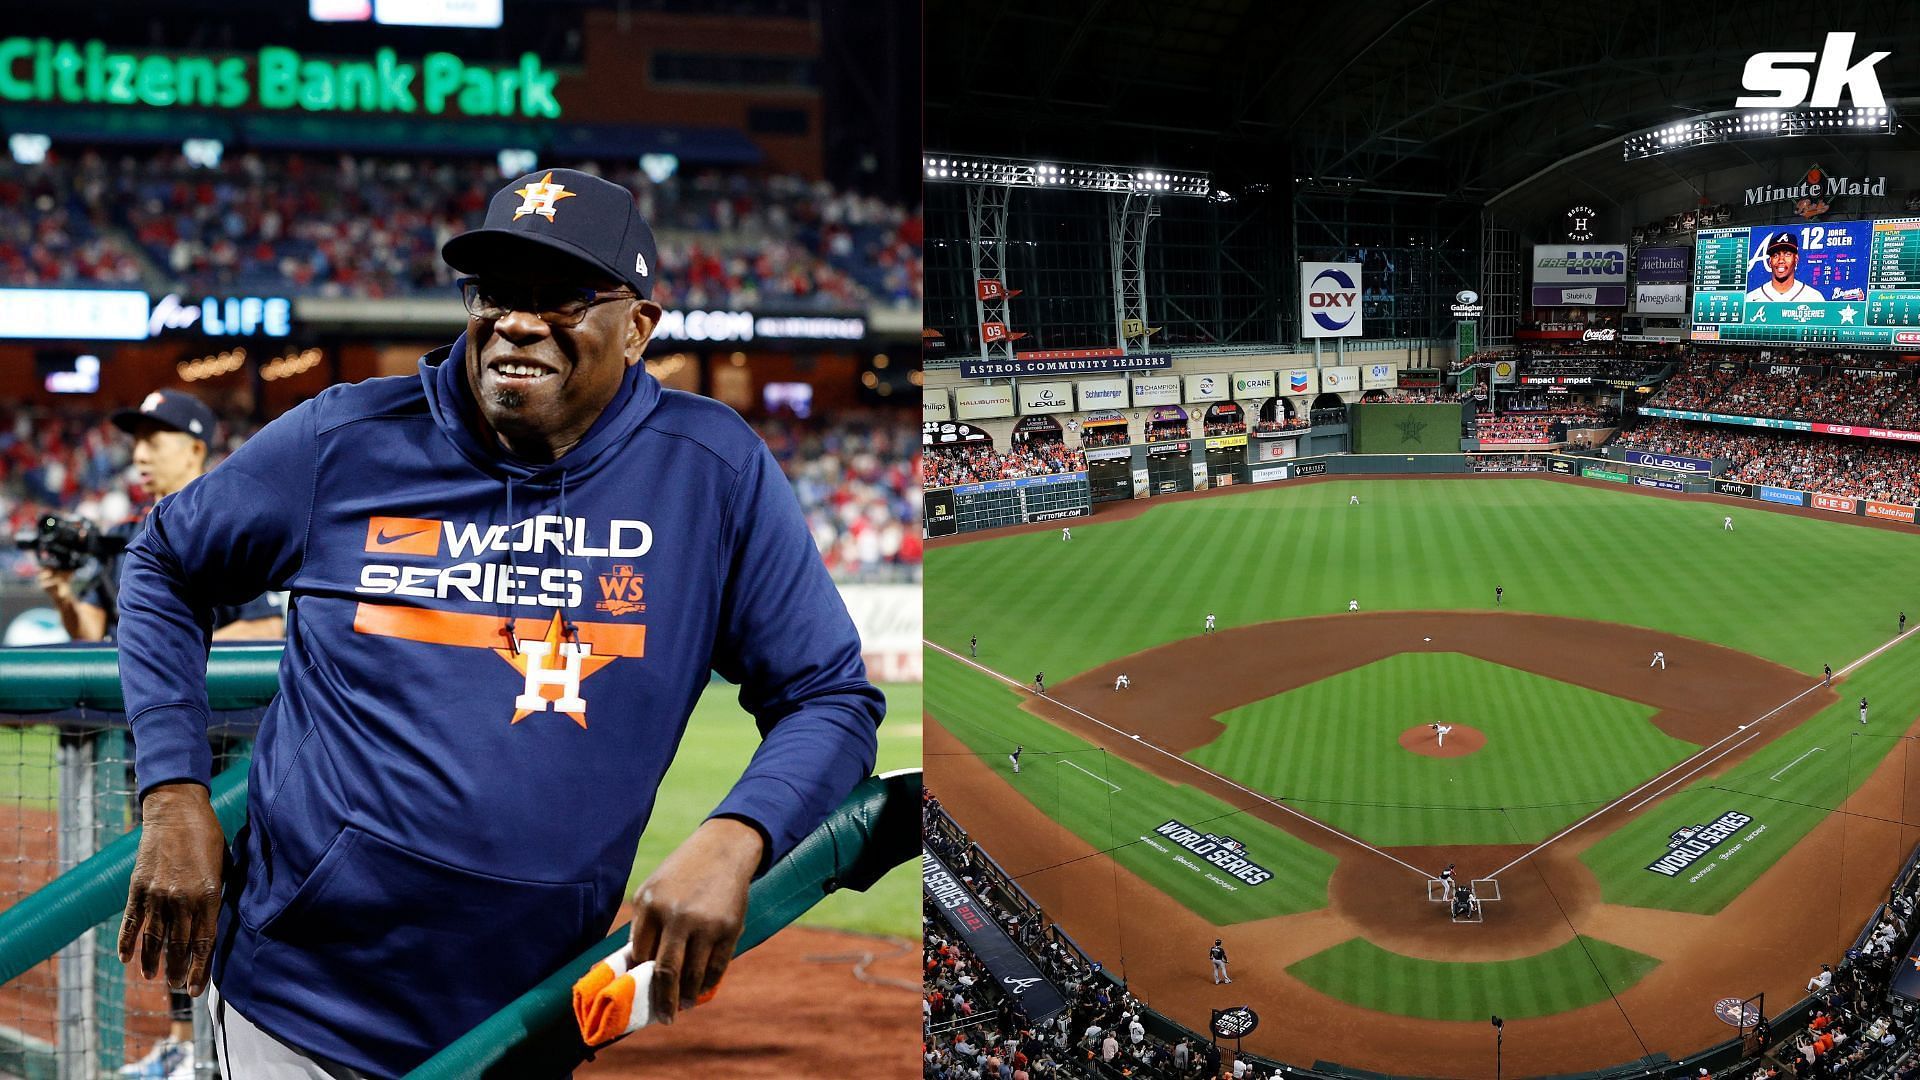 Minute Maid Park roof to be open for World Series Game 6